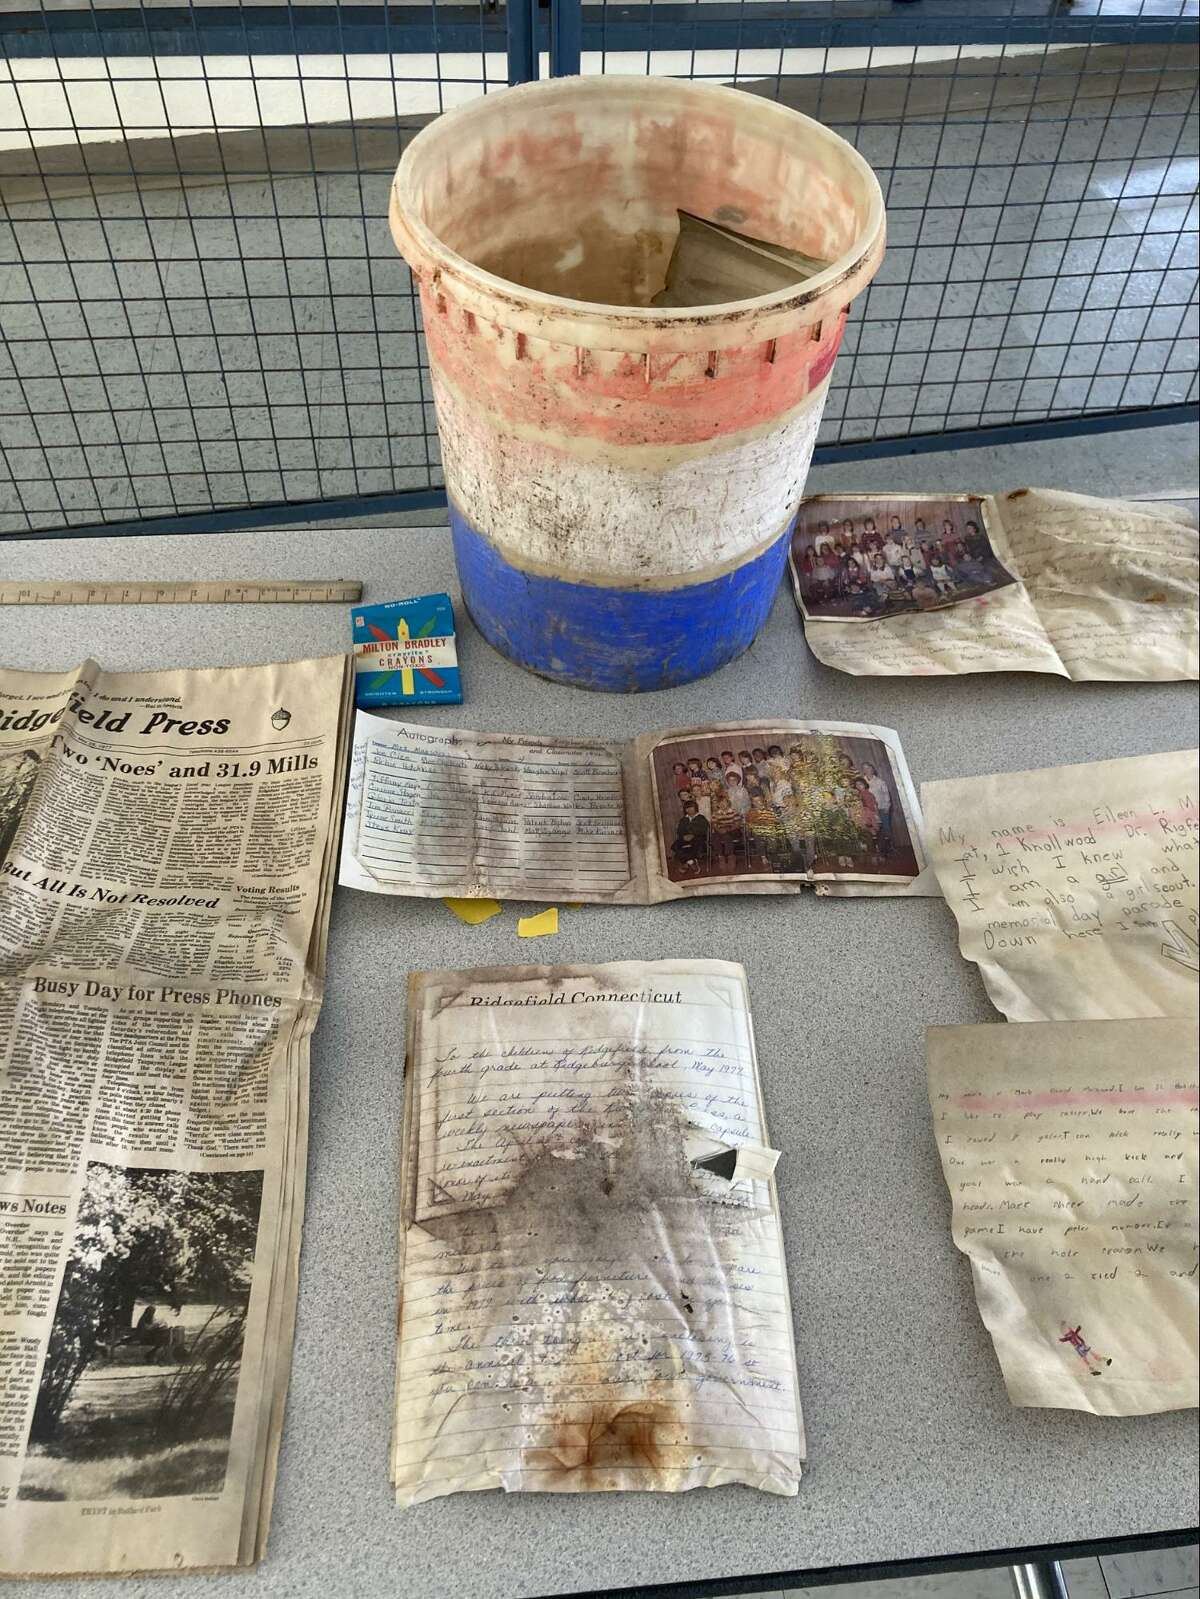 Some of the objects found in the container, including a copy of the Ridgefield Press